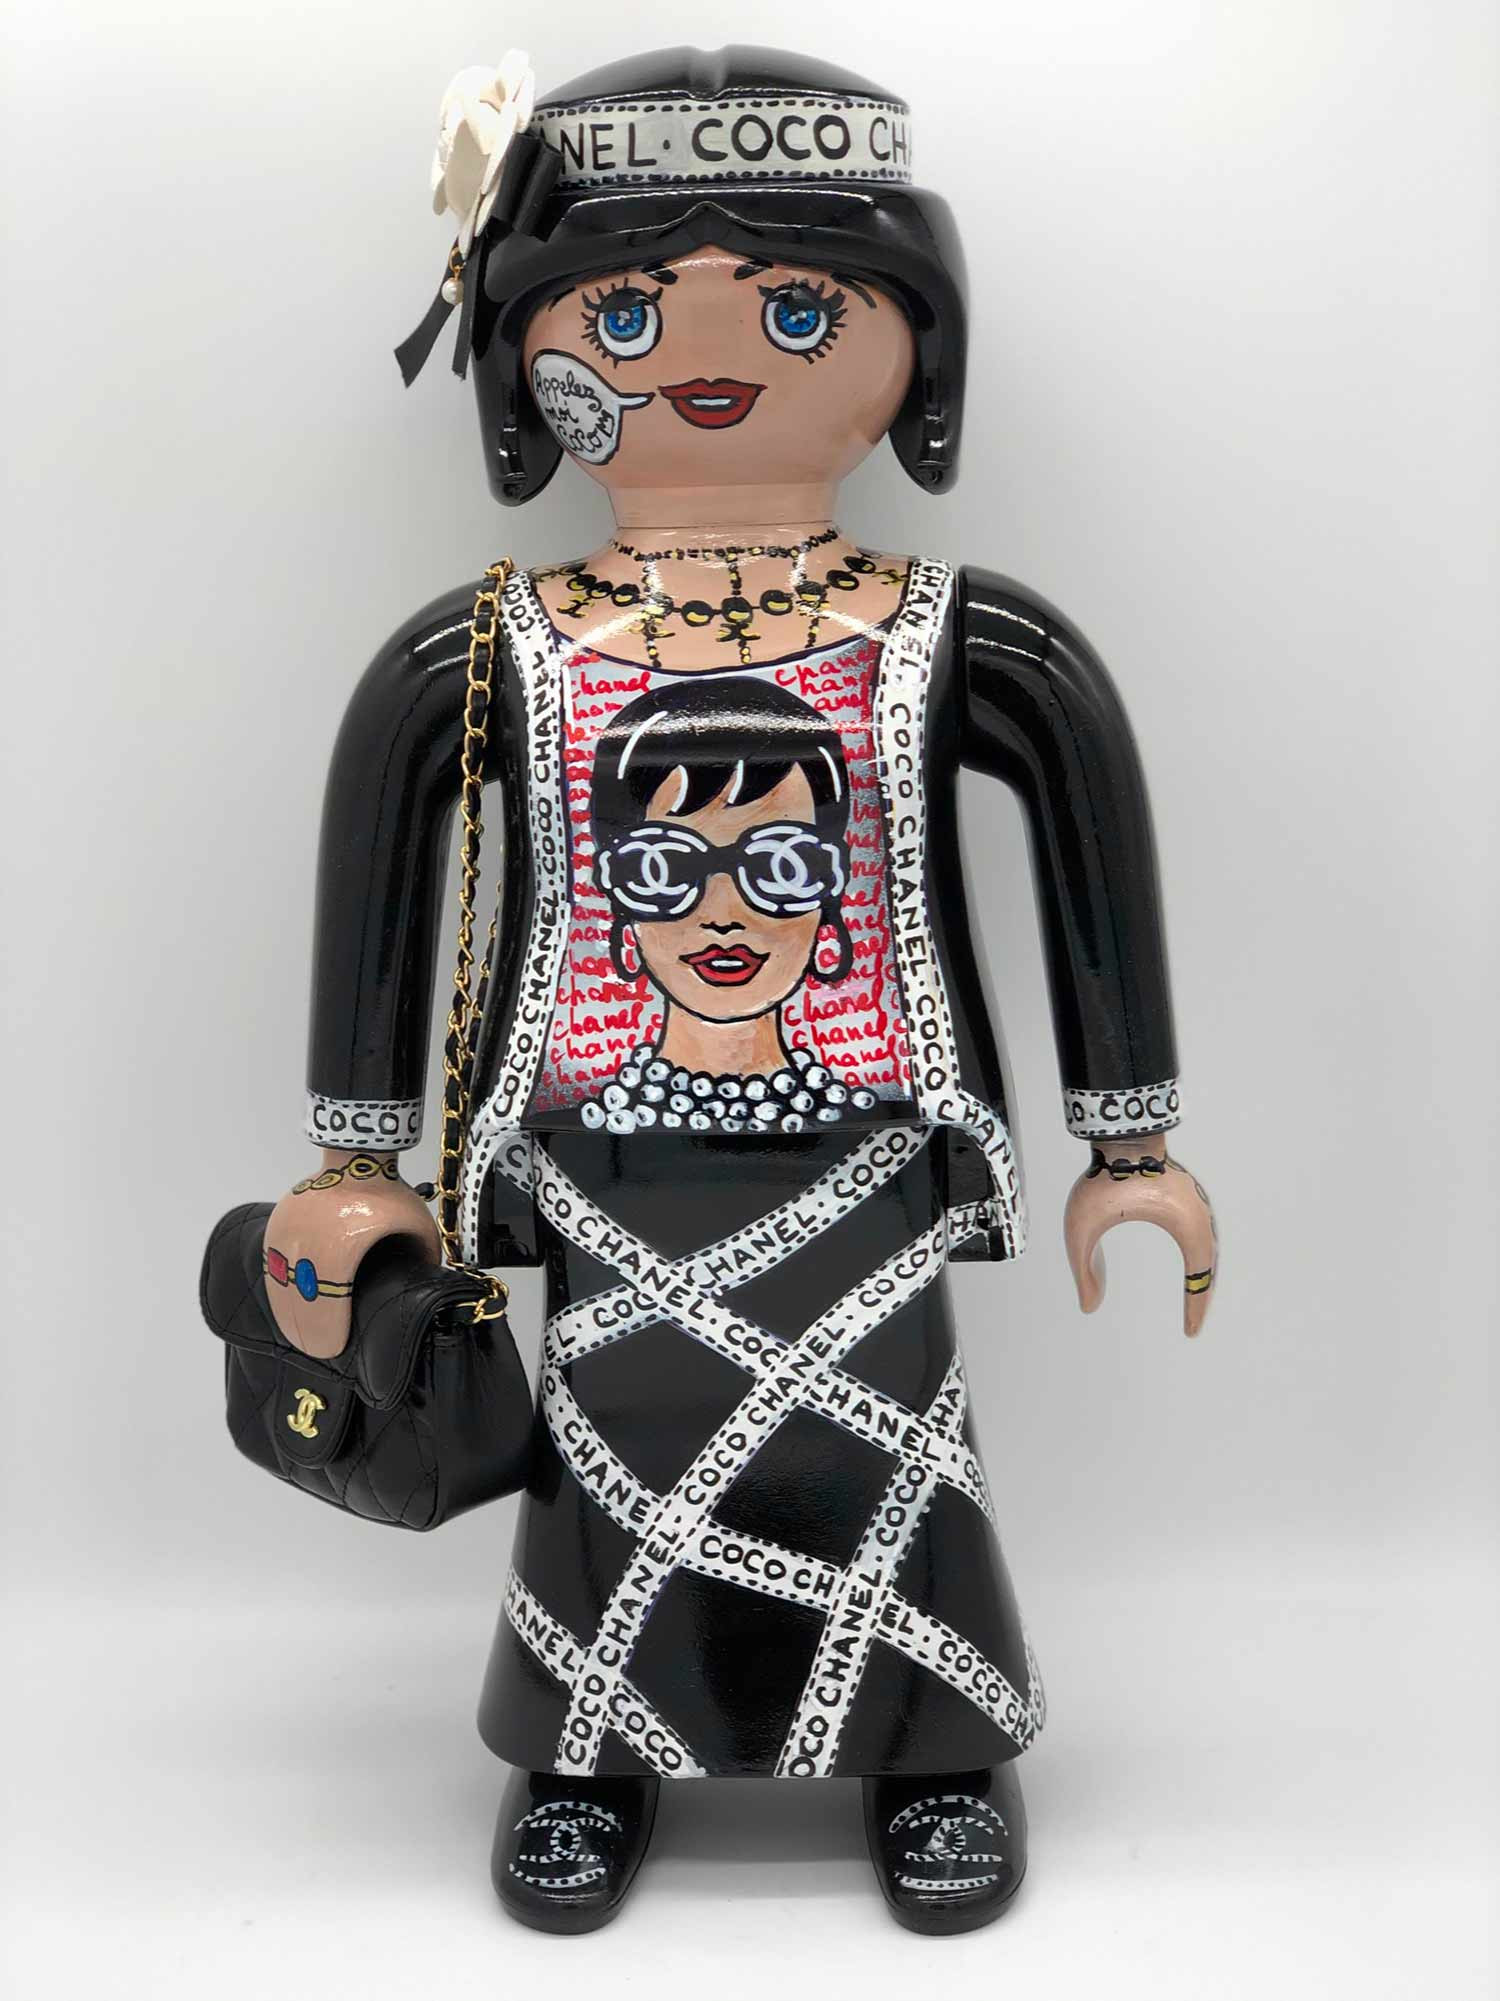 Contemporary Art - Sculpture - Playmobil Coco Chanel class - Frany